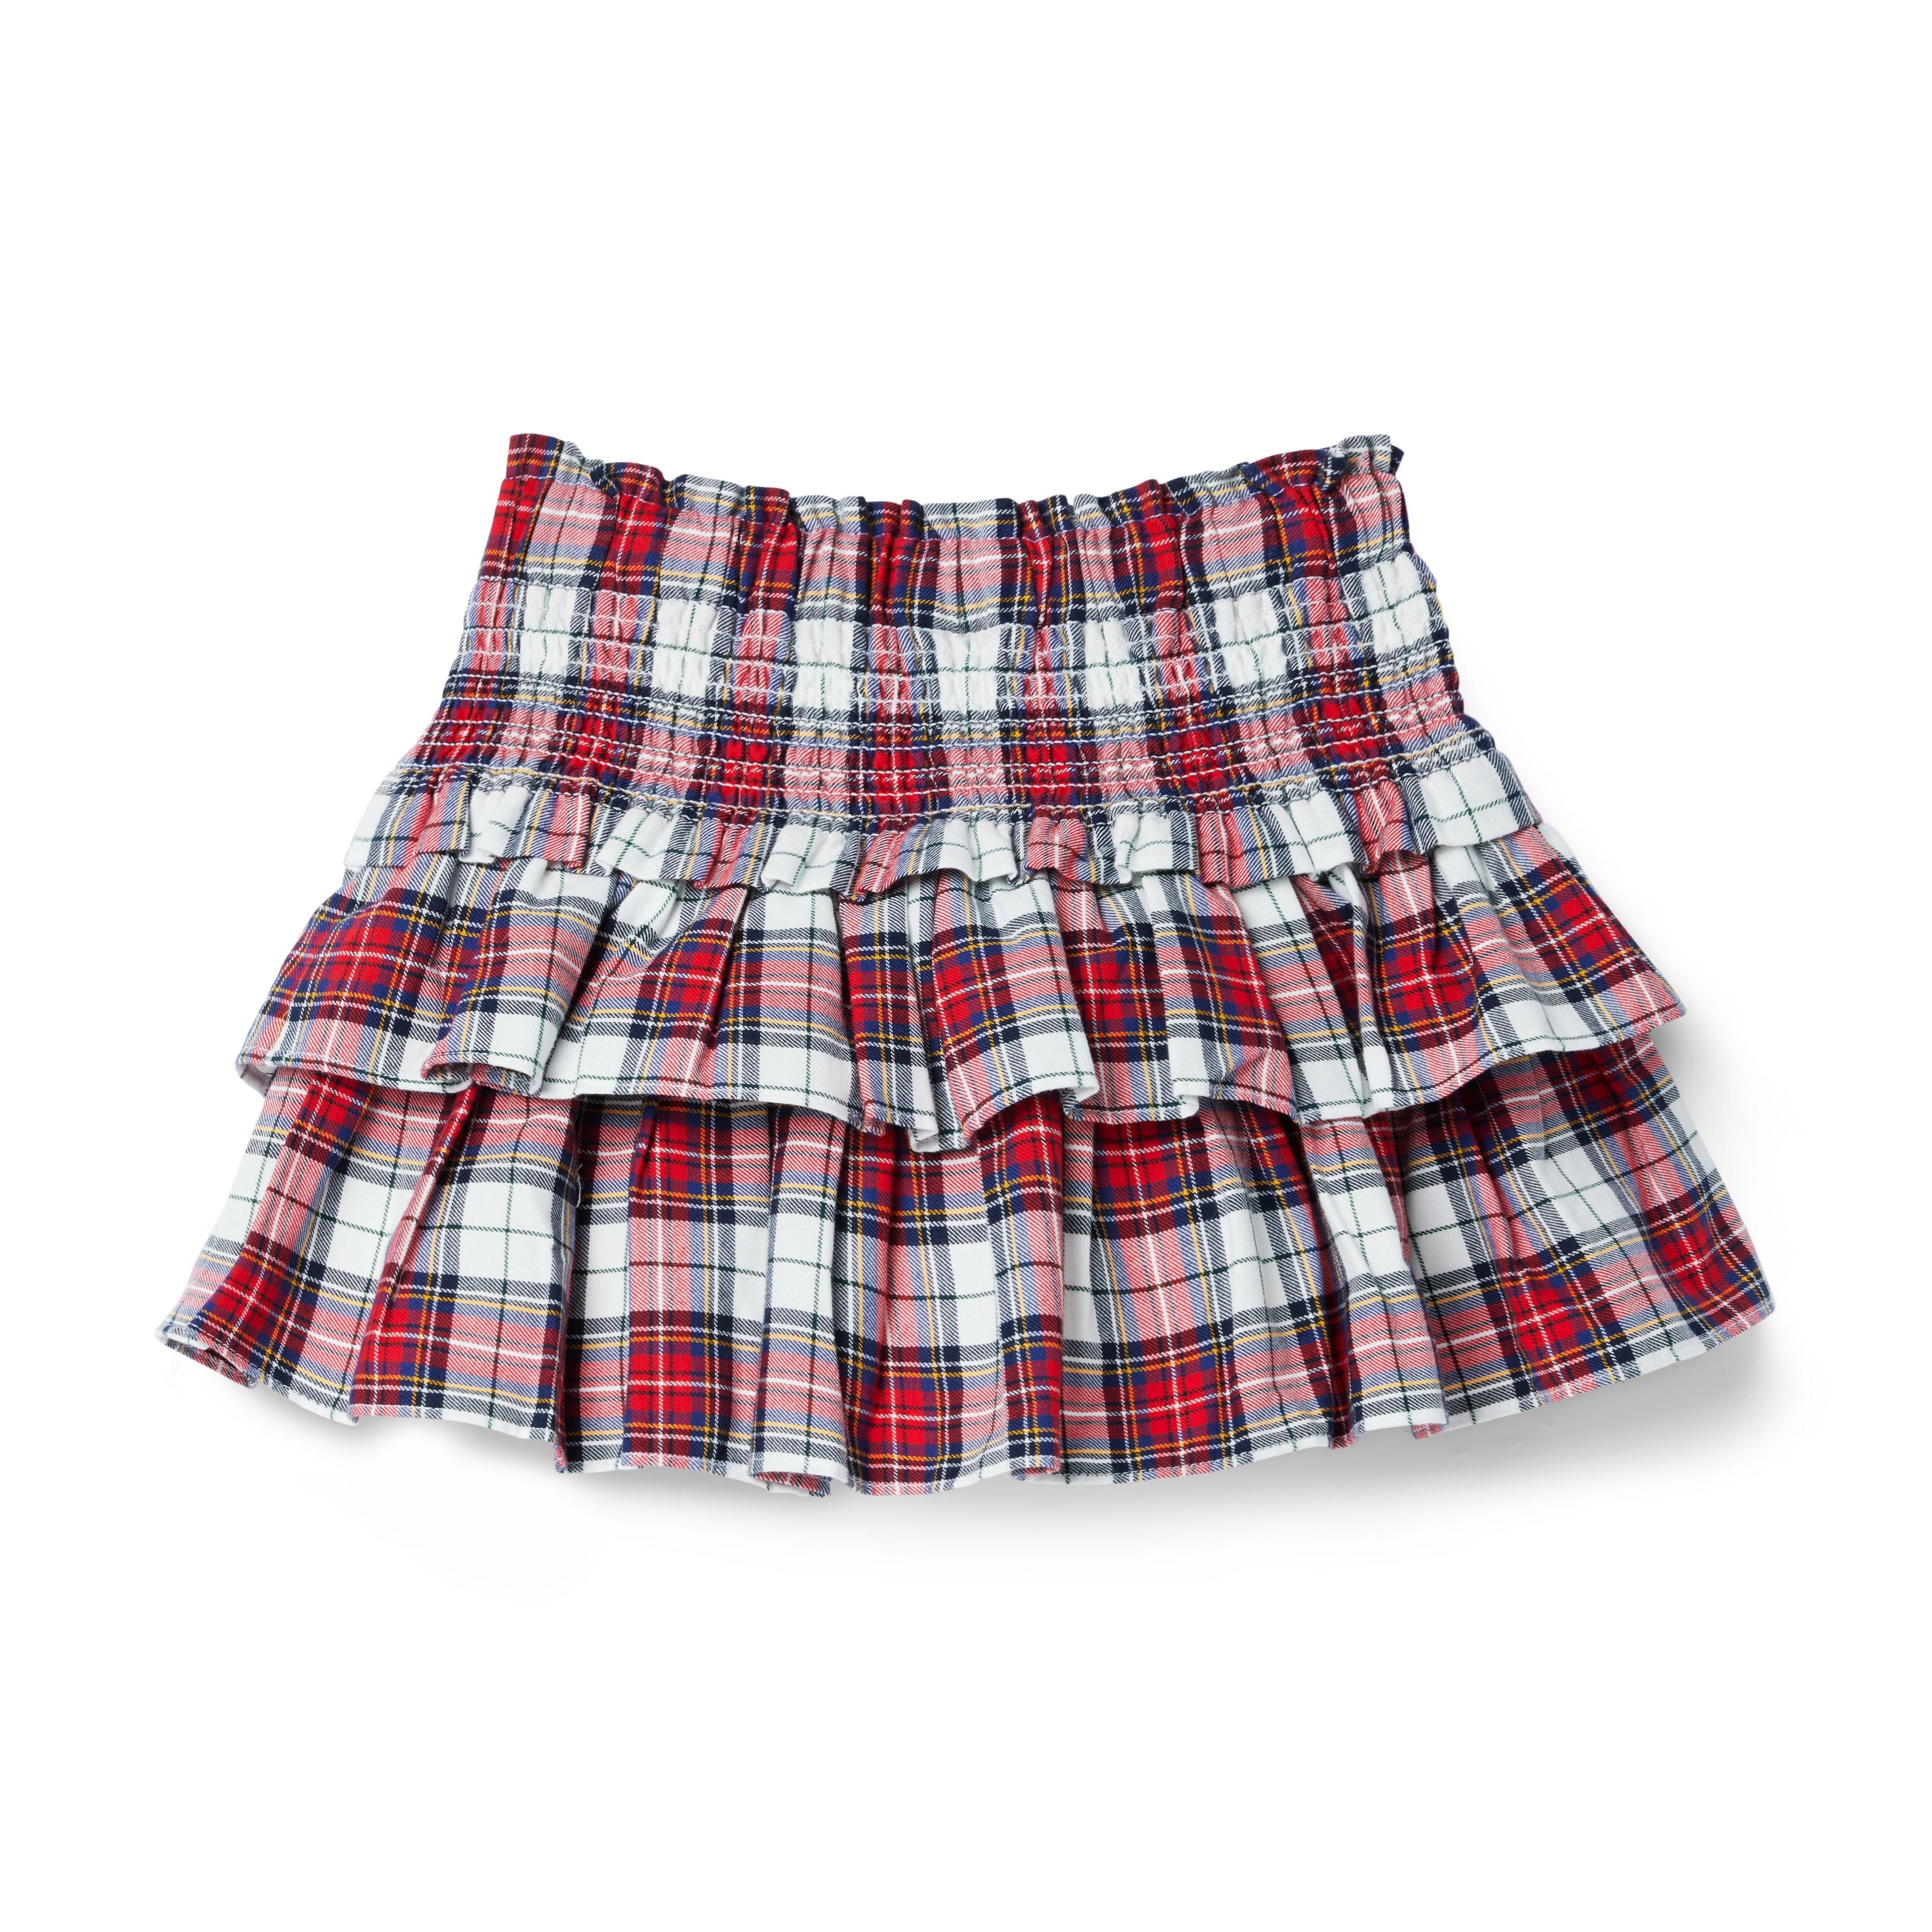 Girl Jet Ivory Tartan The Hailey Smocked Skirt by Janie and Jack